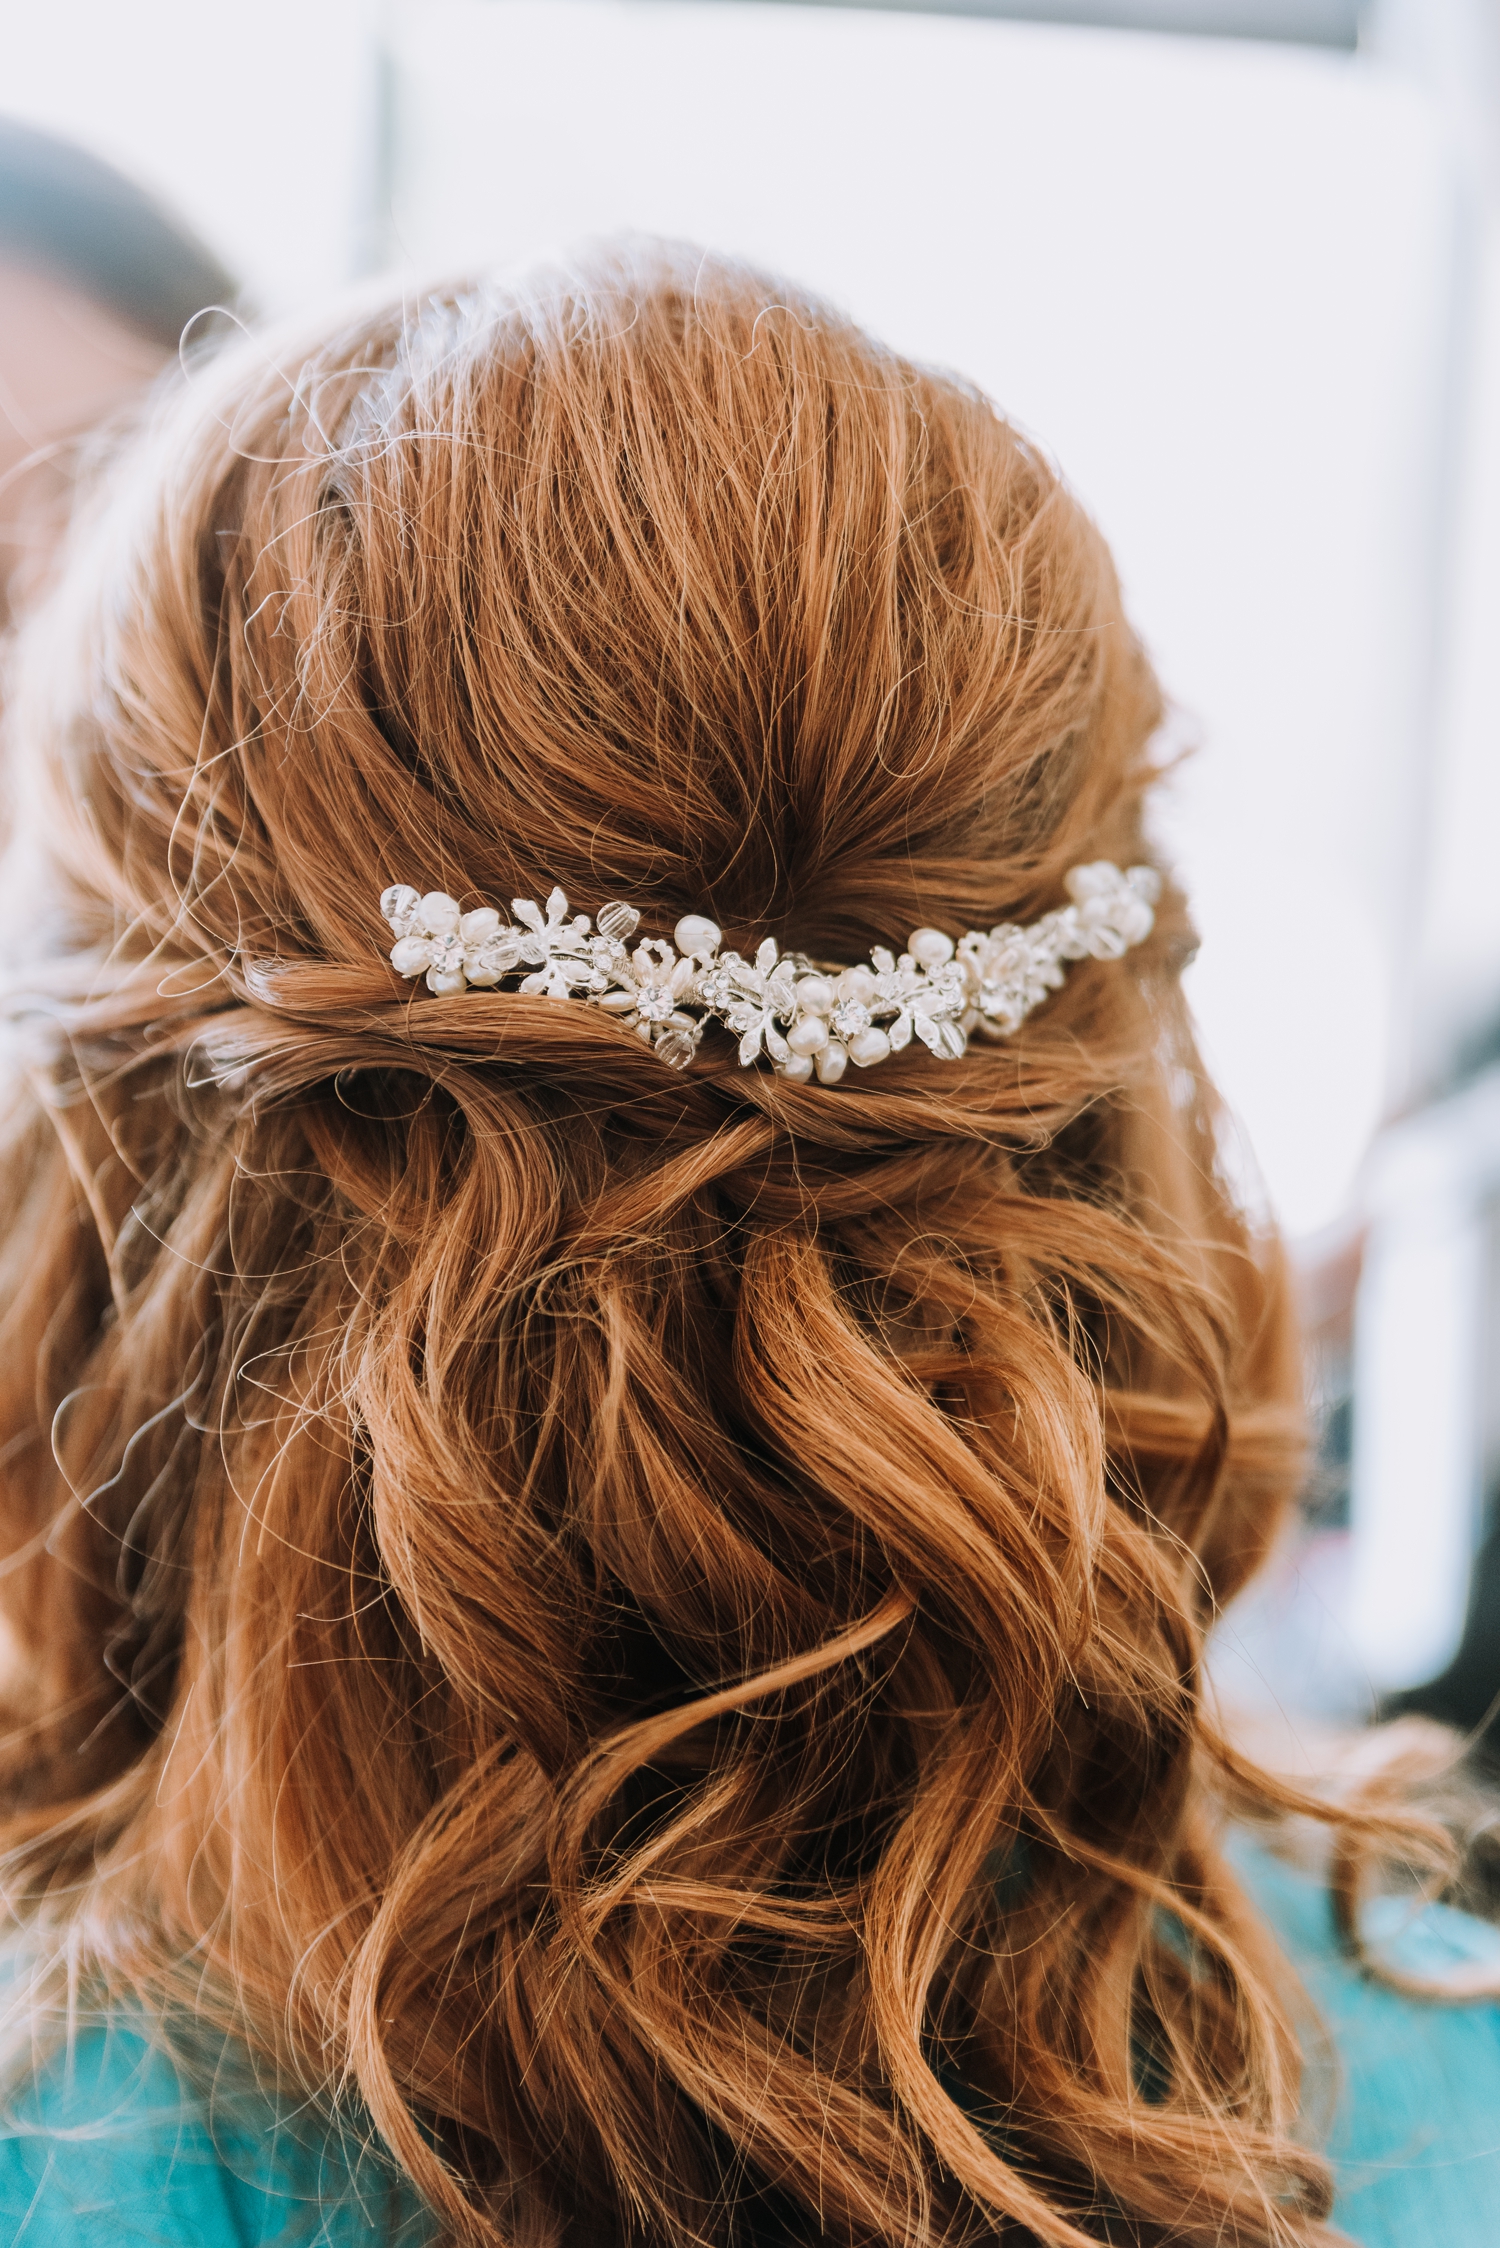 Gorgeous Bridal Hairstyles - Classic Indianapolis Wedding - Canal 337 Wedding - The Overwhelmed Bride Wedding Blog